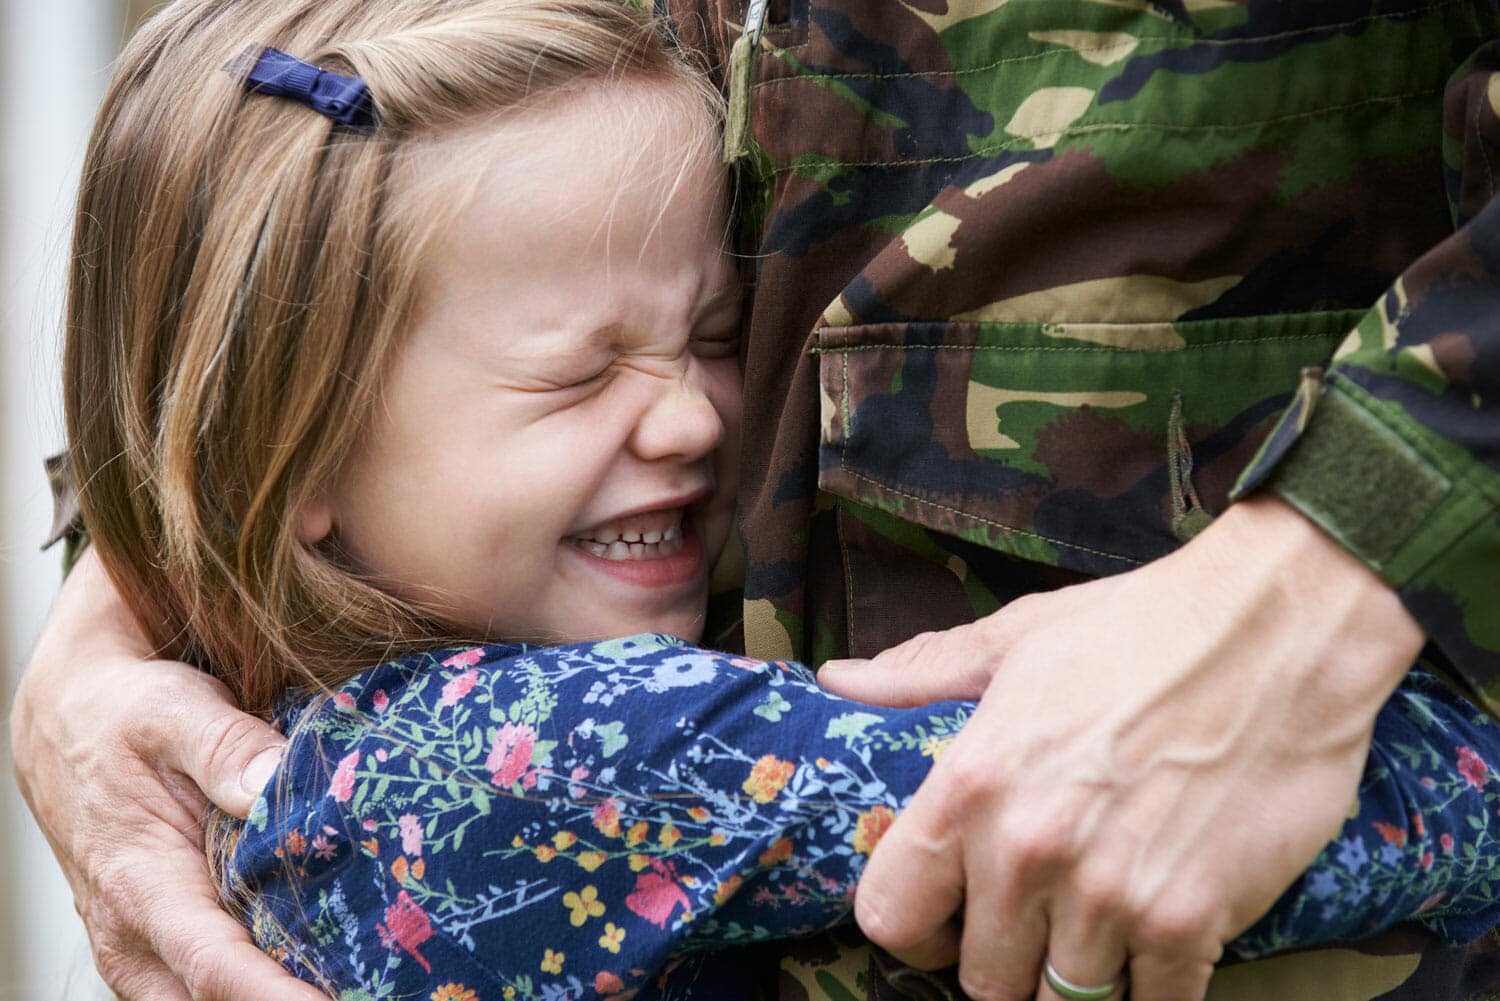 will my child's mother get custody because I'm military?